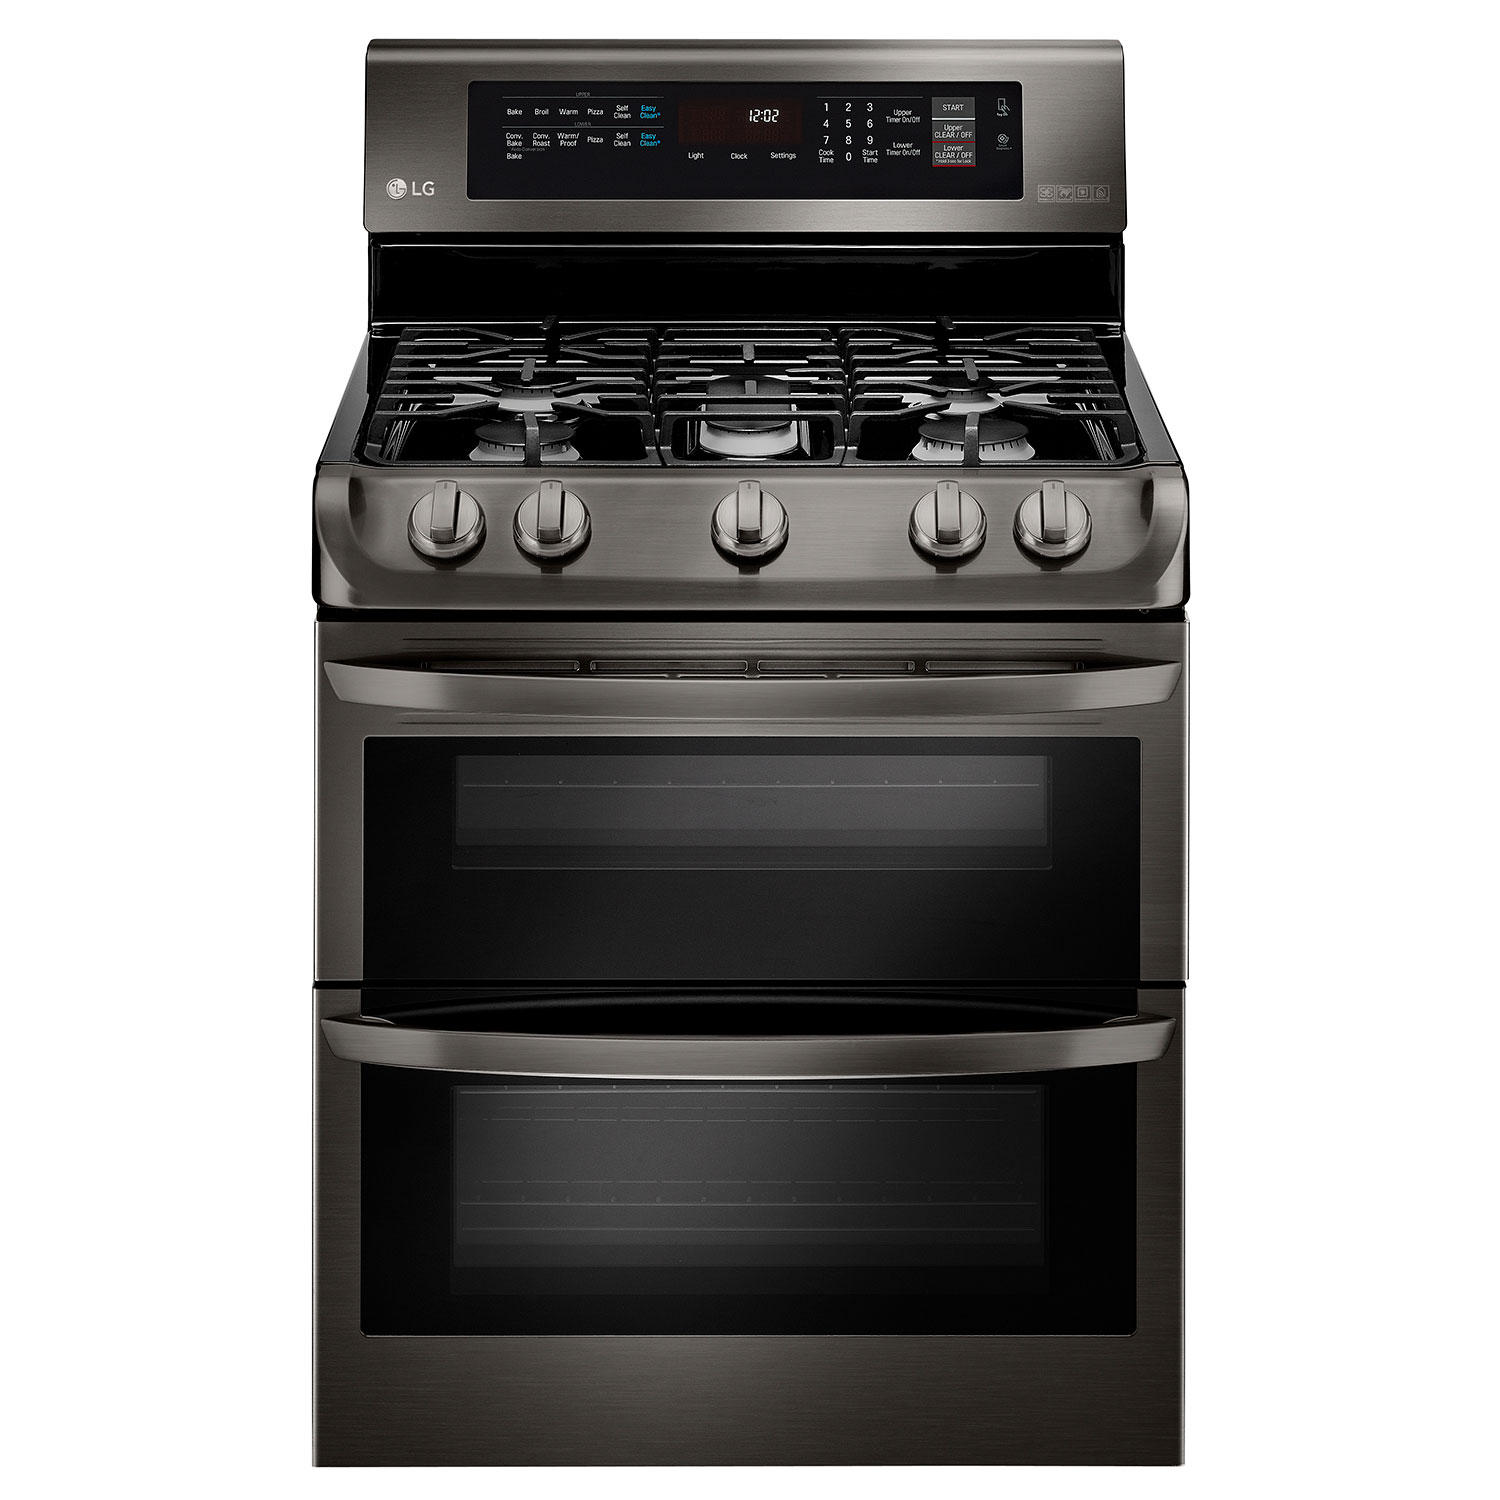 LG LDG4315BD 6.9 cu. ft. Gas Double Oven Range with ProBake Convection